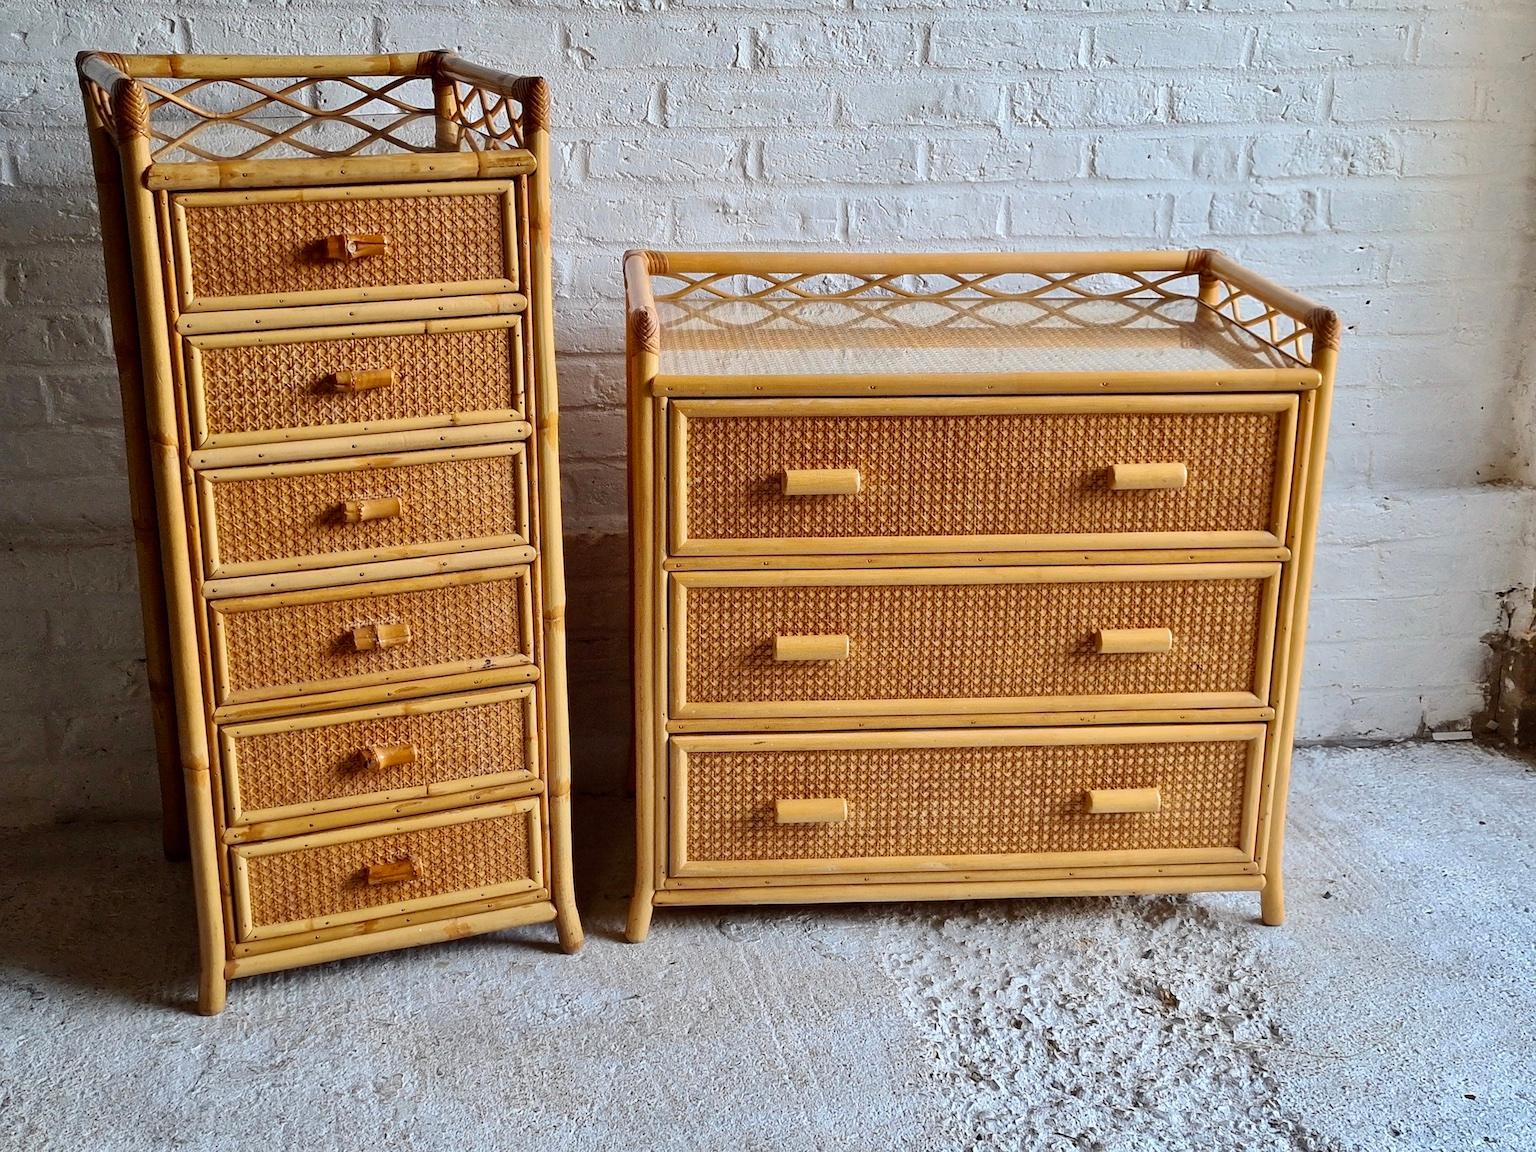 Bamboo Midcentury Rattan / Cane Chest of Drawers by Angraves, England, 1970s